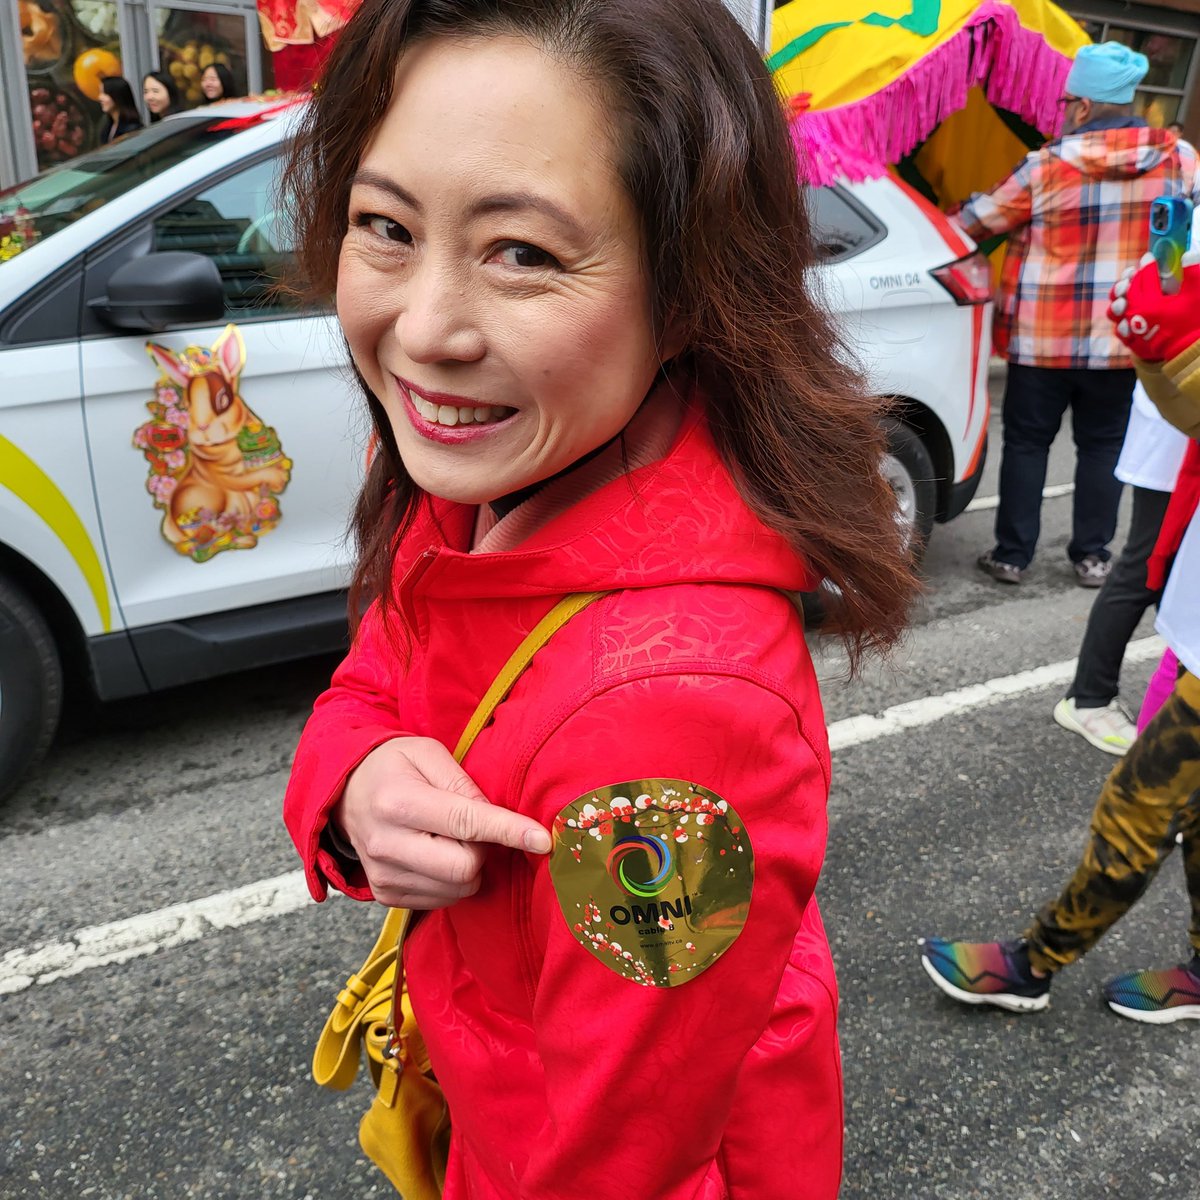 I received the gold seal today! Lol #vancouverchinatown #LunarNewYear